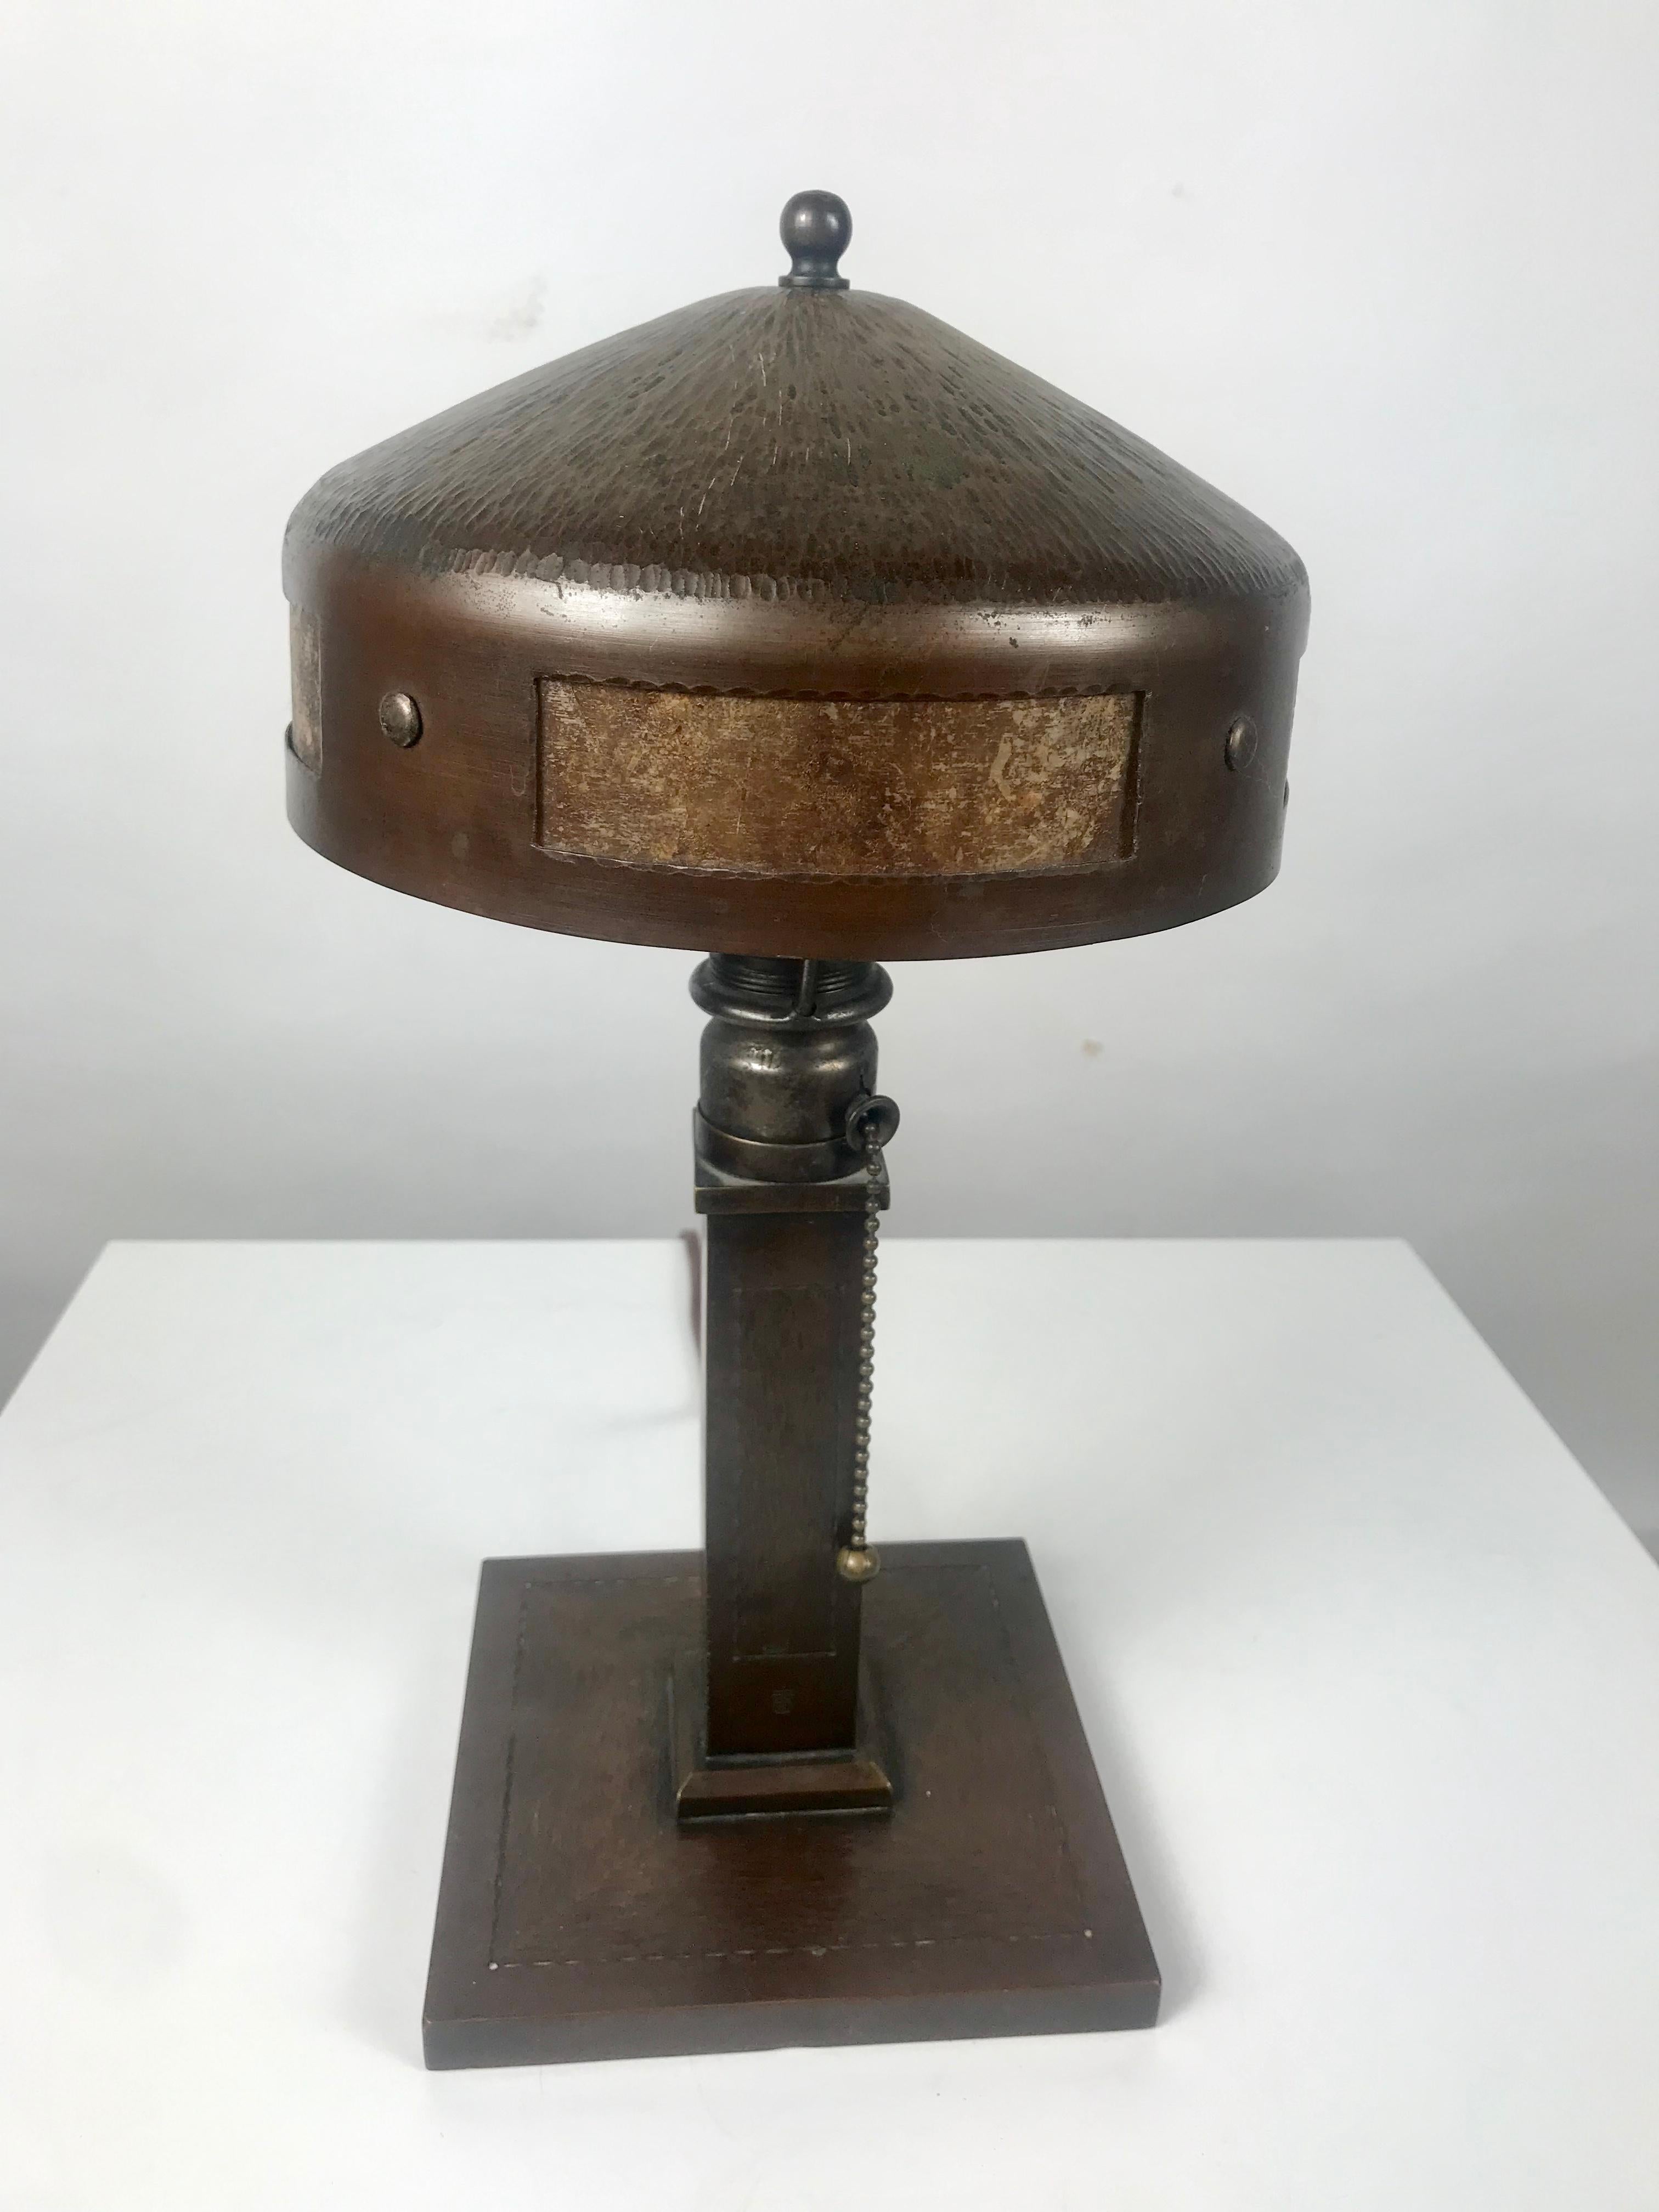 American Classic Arts & Crafts Roycroft Hammered Copper and Mica Table Lamp